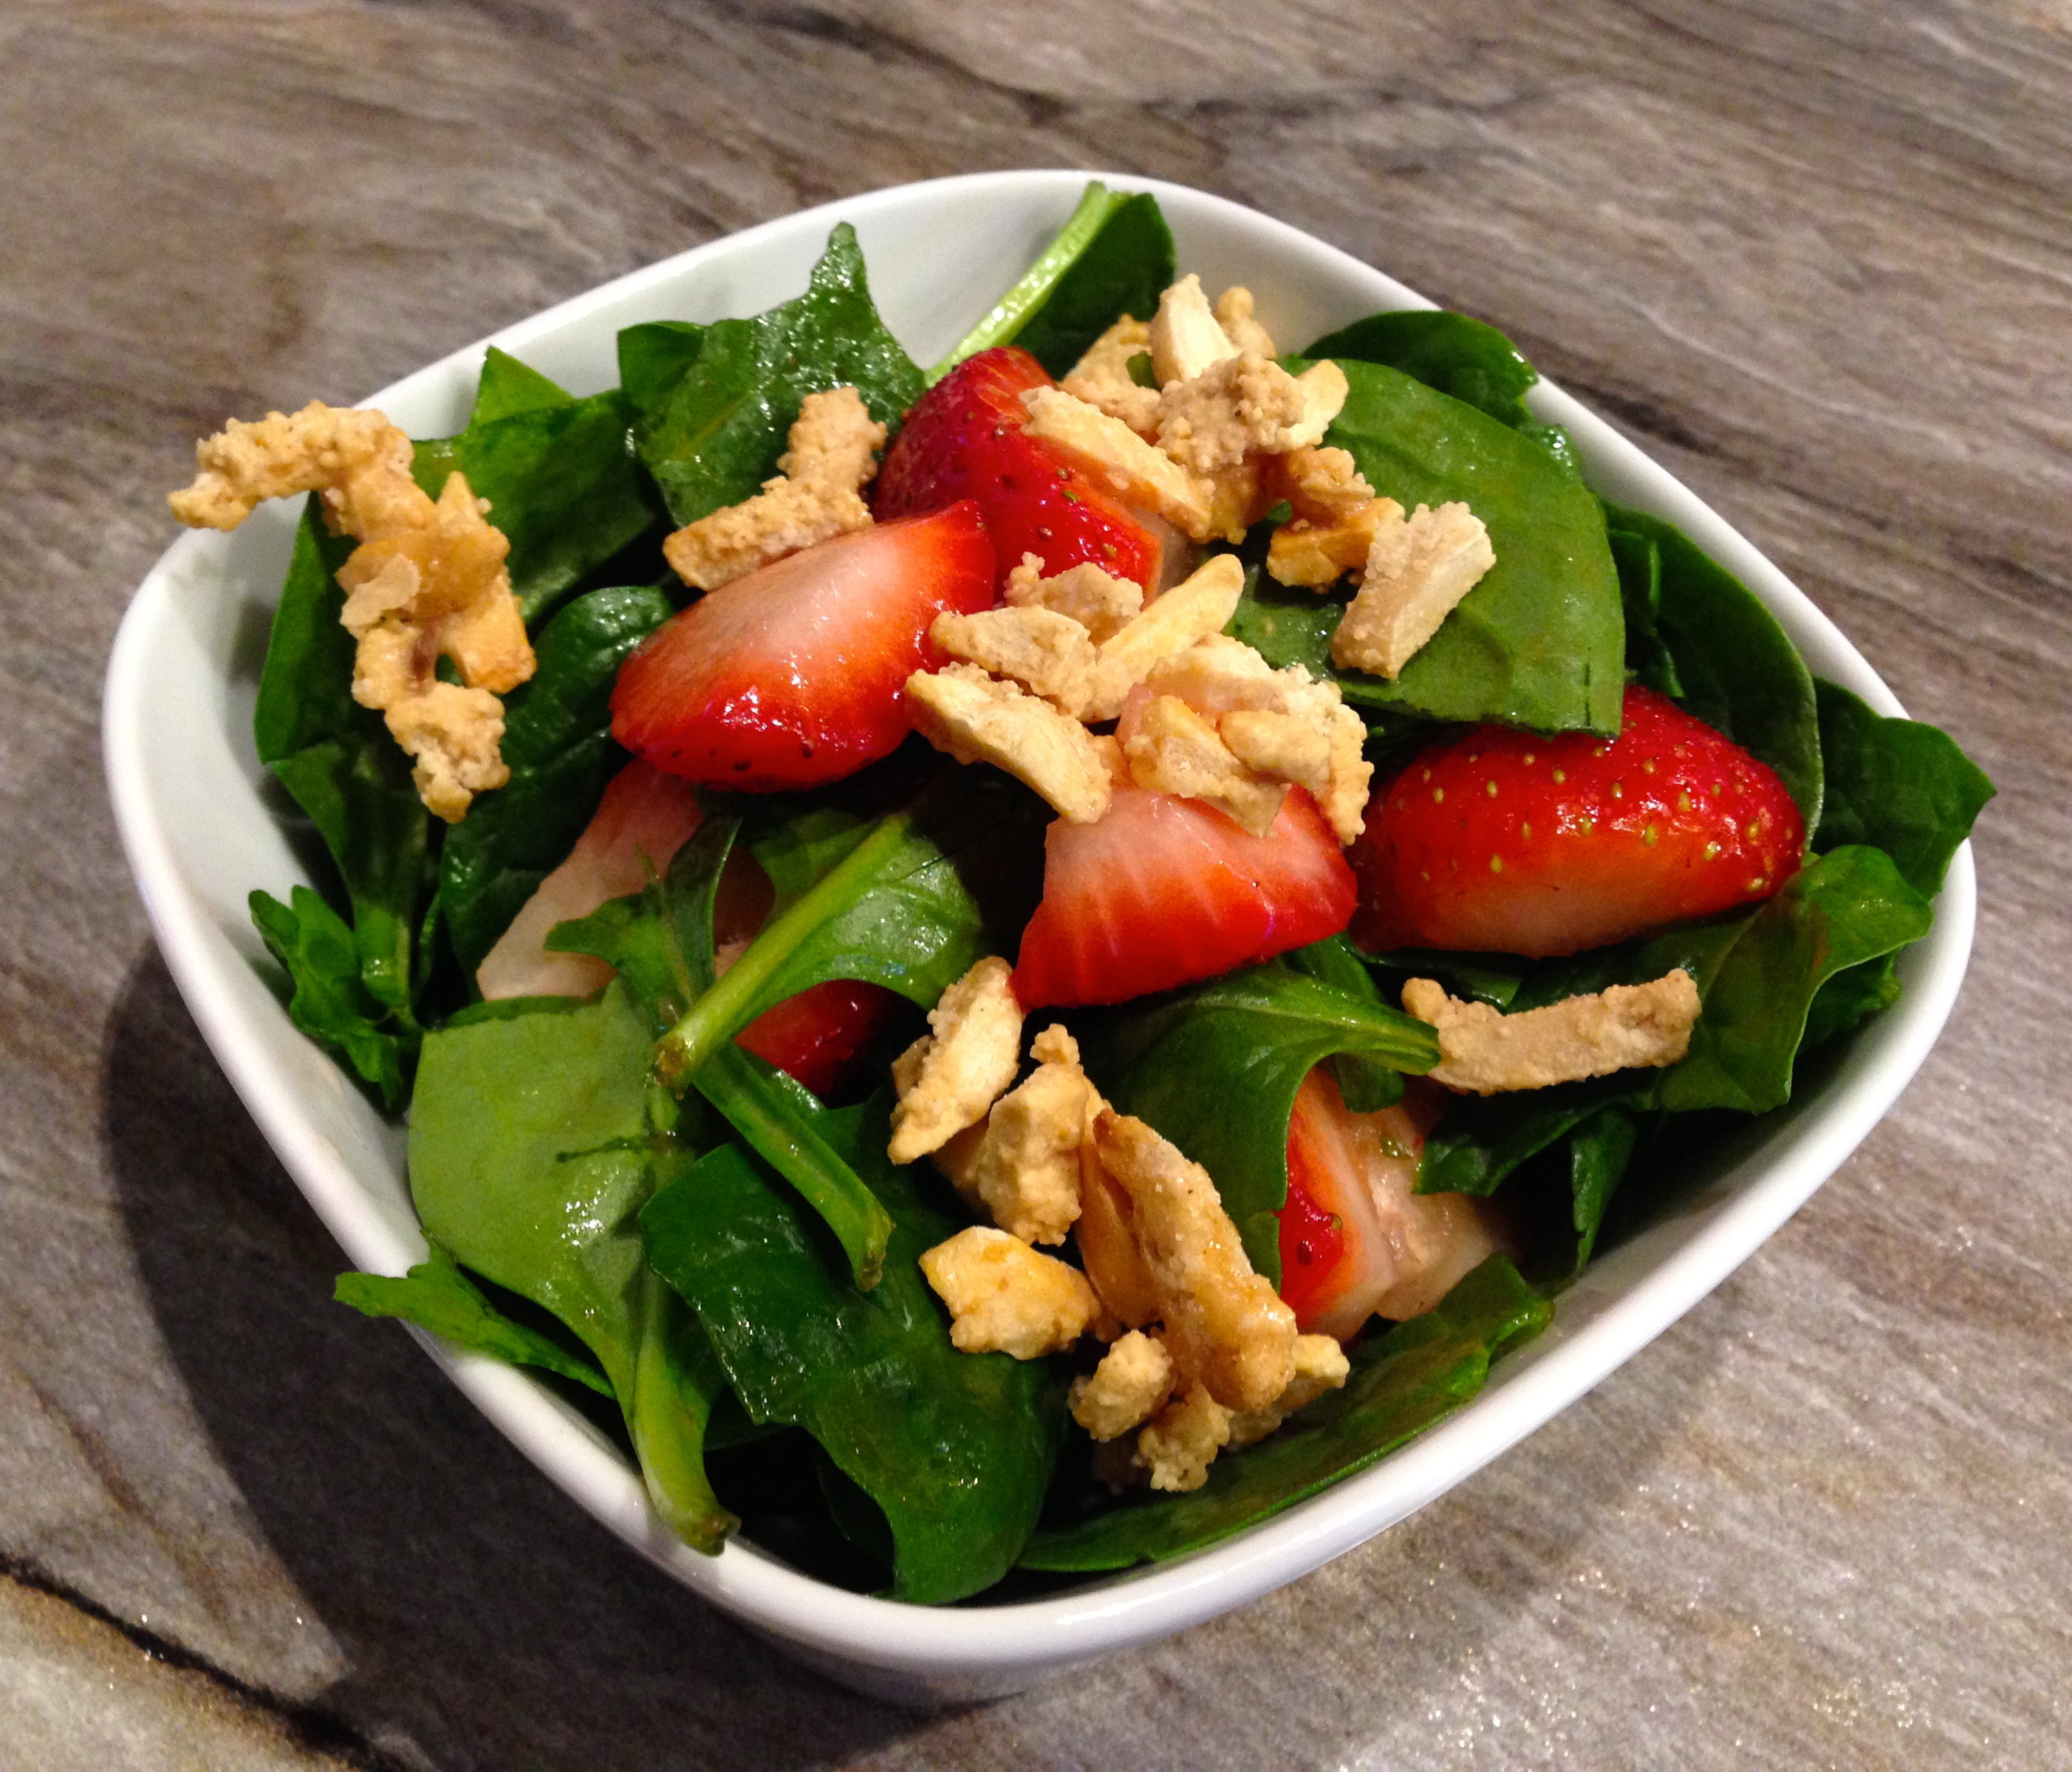 Spinach Salad with Ginger & Lime Vinaigrette